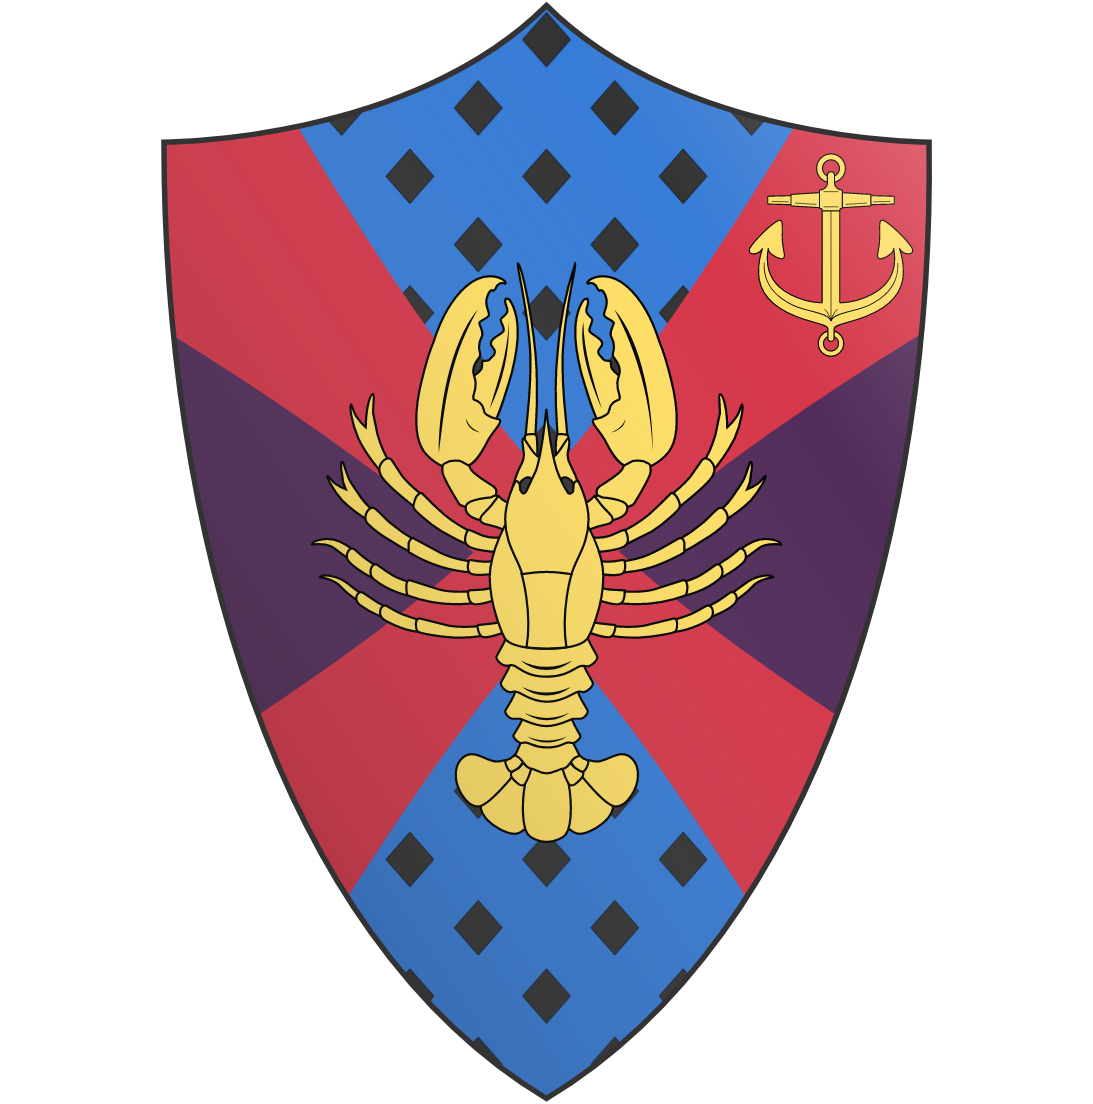 a fictional coat of arms, a golden lobster sits in the middle, there is a golden boat anchor in the top left hand corner. The background is blue with black diamonds on the top and the bottom, the sides are purple and a red cross crosses the blason diagonally